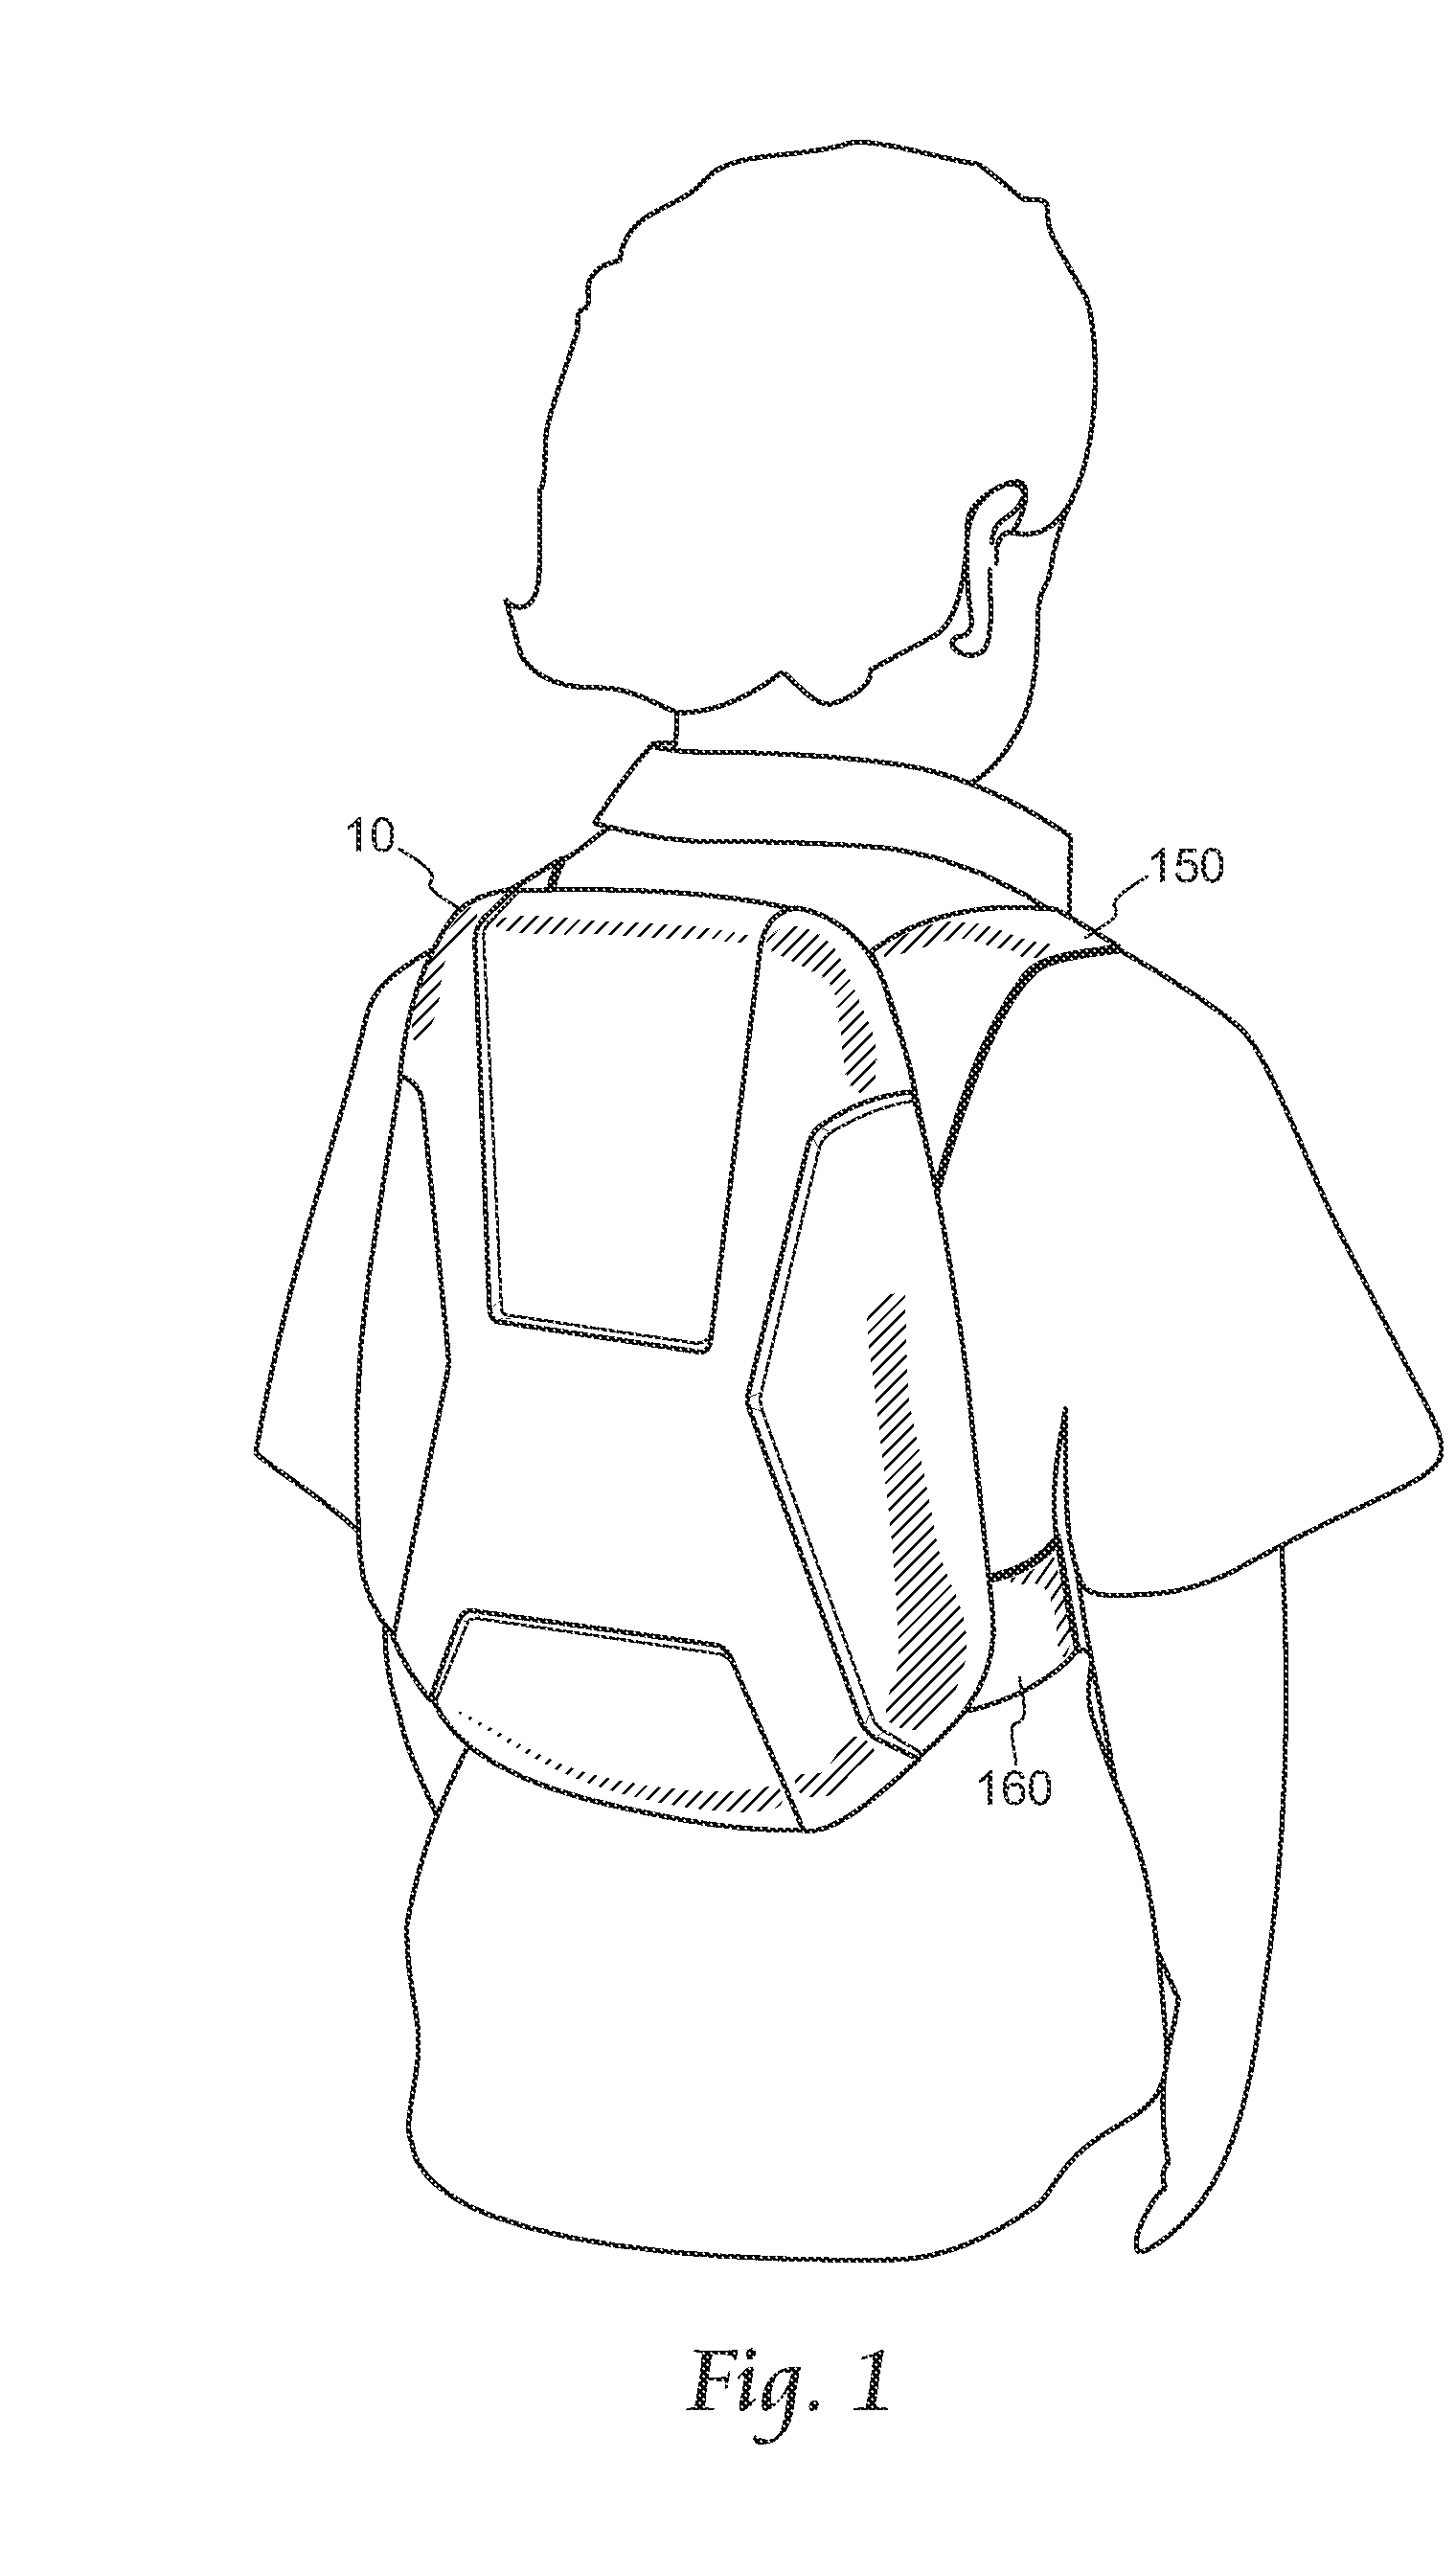 Integrated Wearable Costume and Storage Case